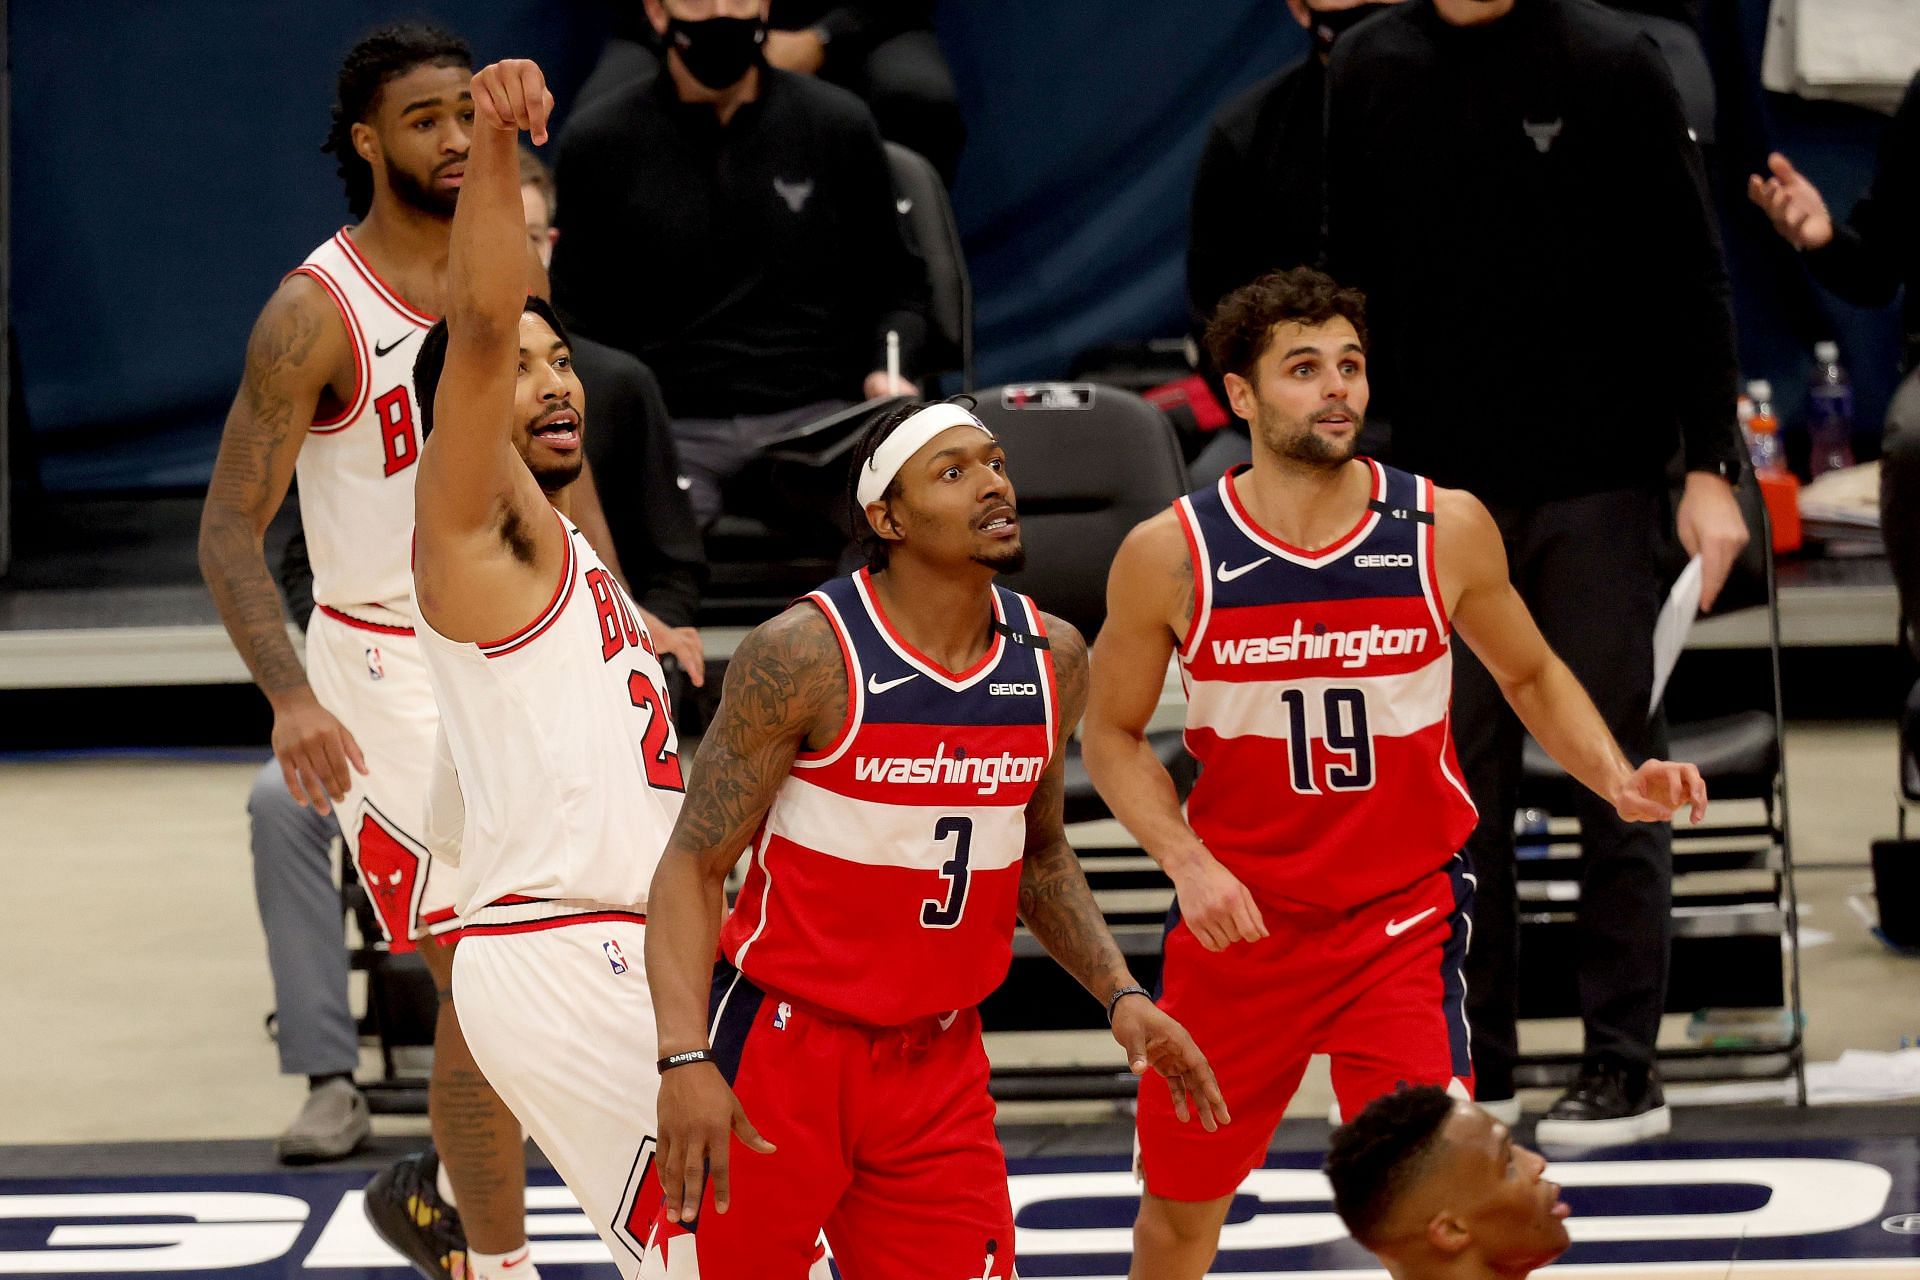 The Chicago Bulls will host the Washington Wizards on January 7th